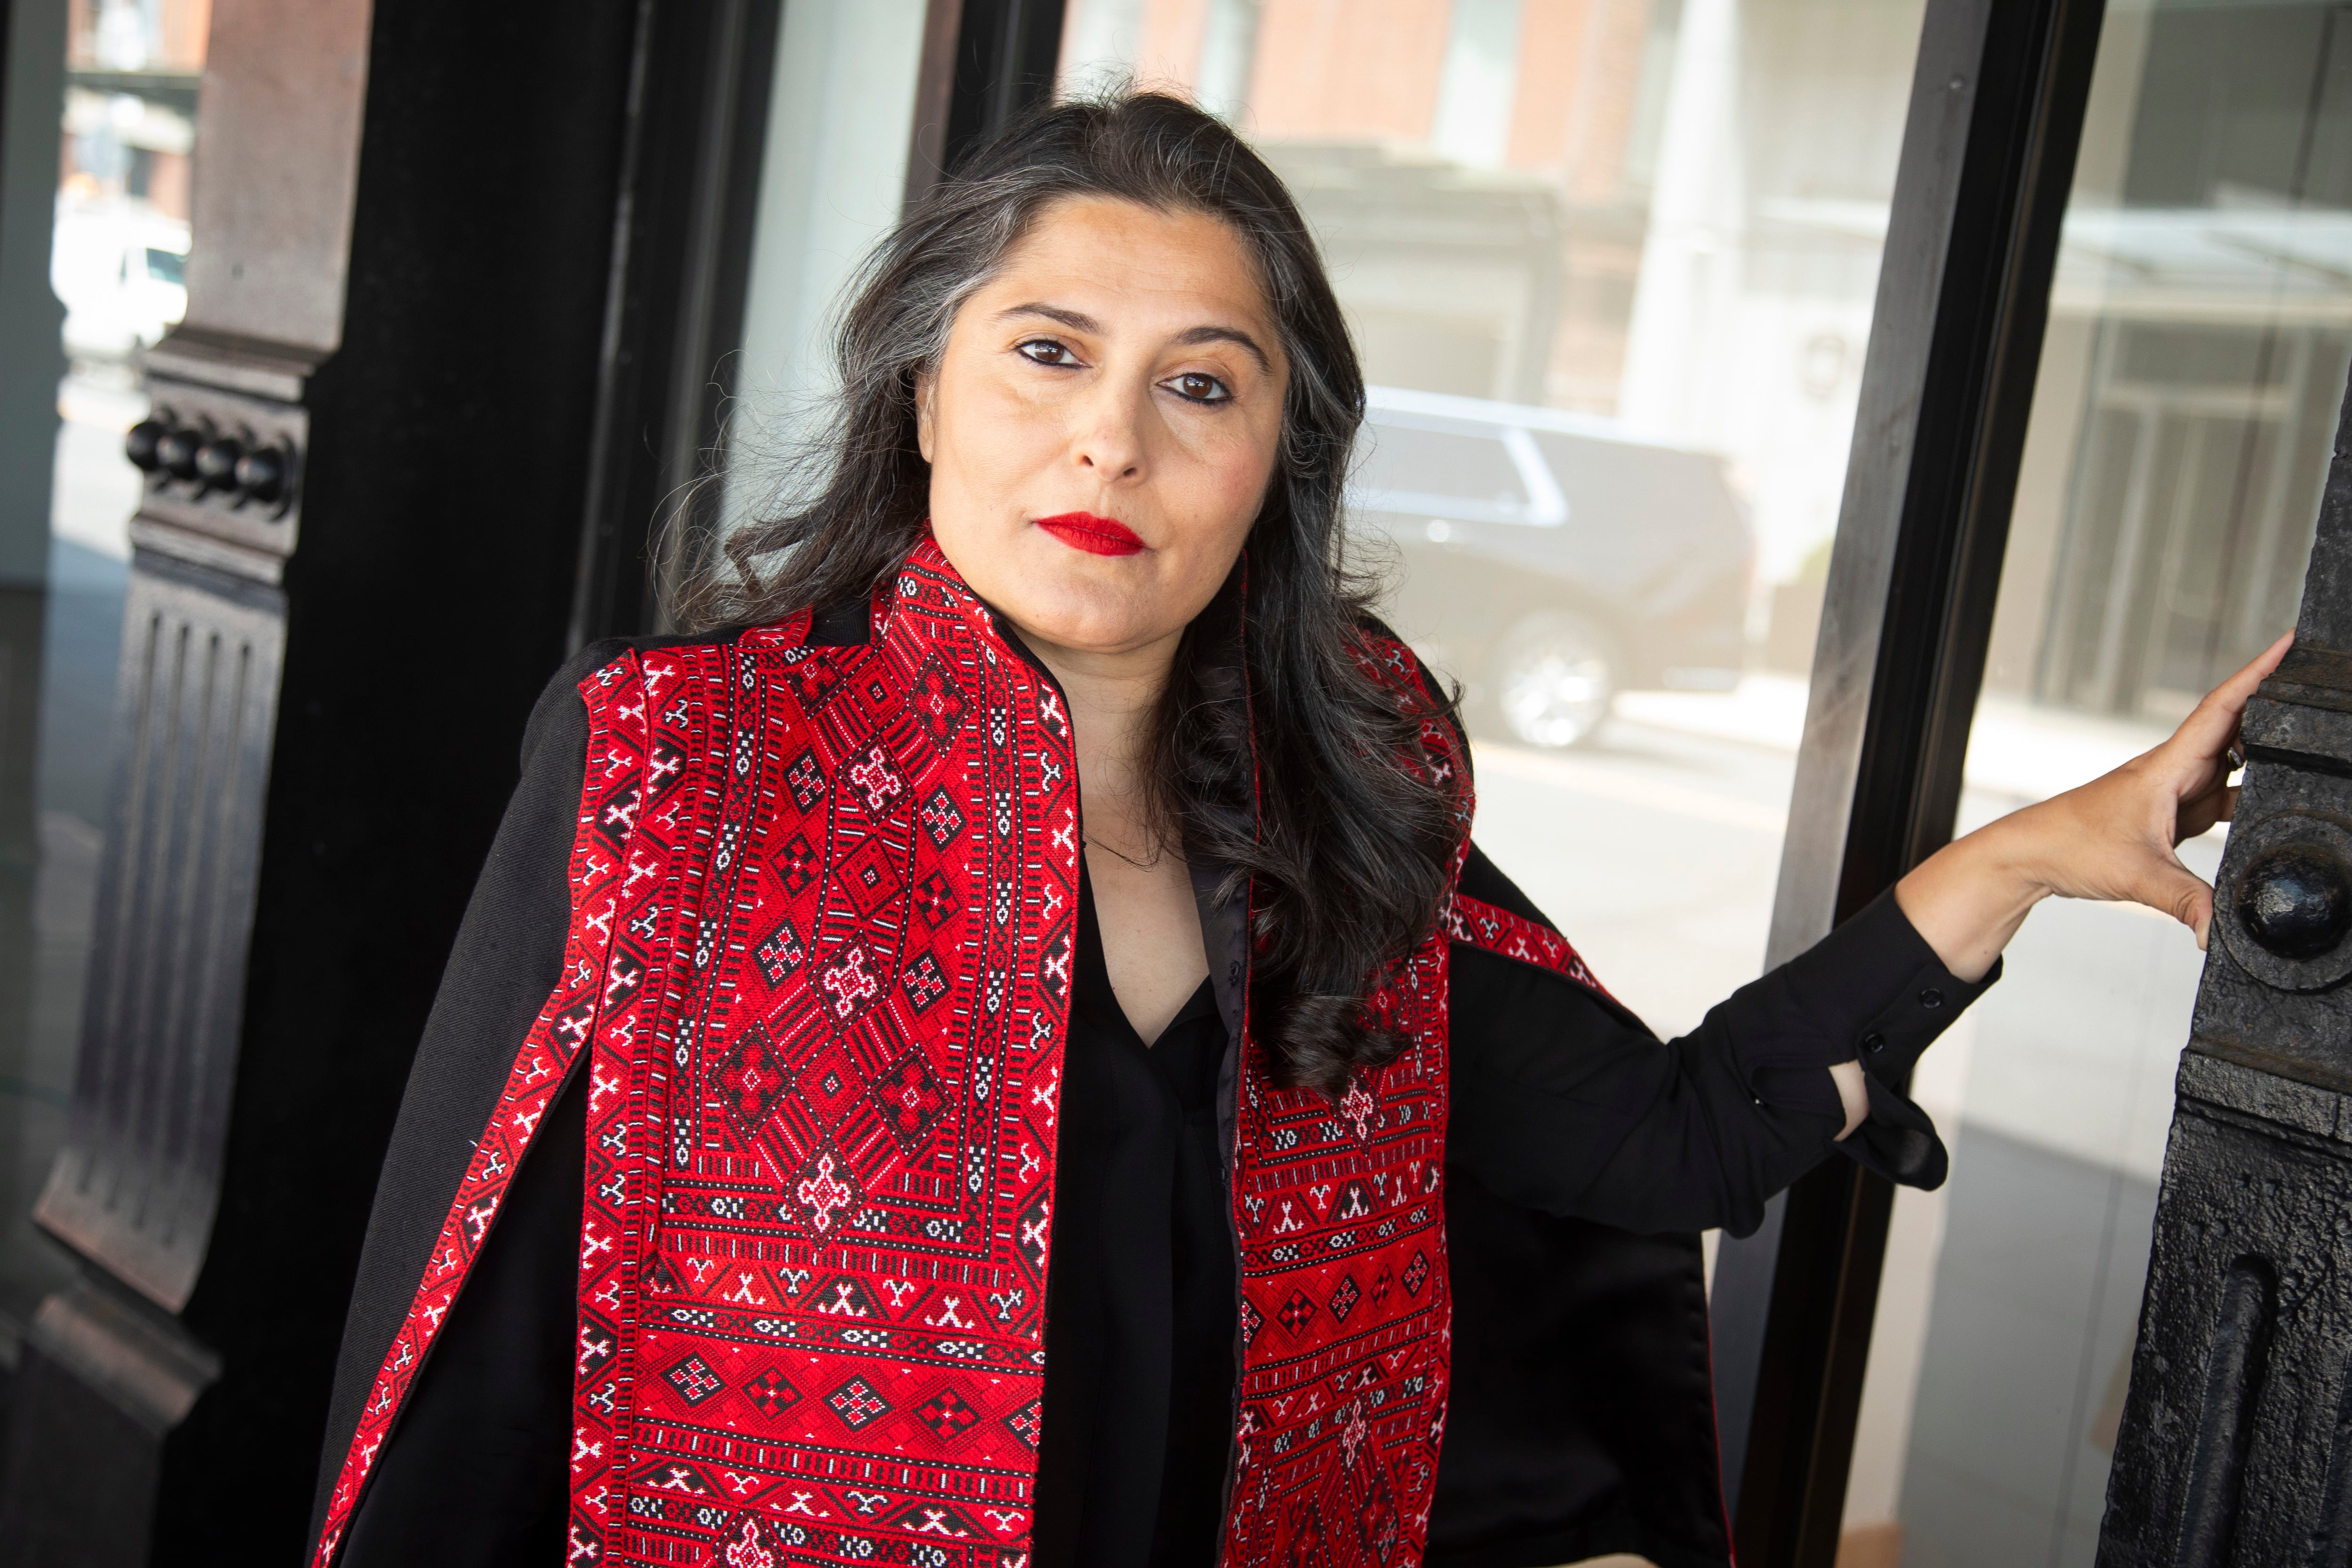 From DVF to Star Wars, filmmaker Sharmeen Obaid-Chinoy charts her own path in Hollywood thumbnail